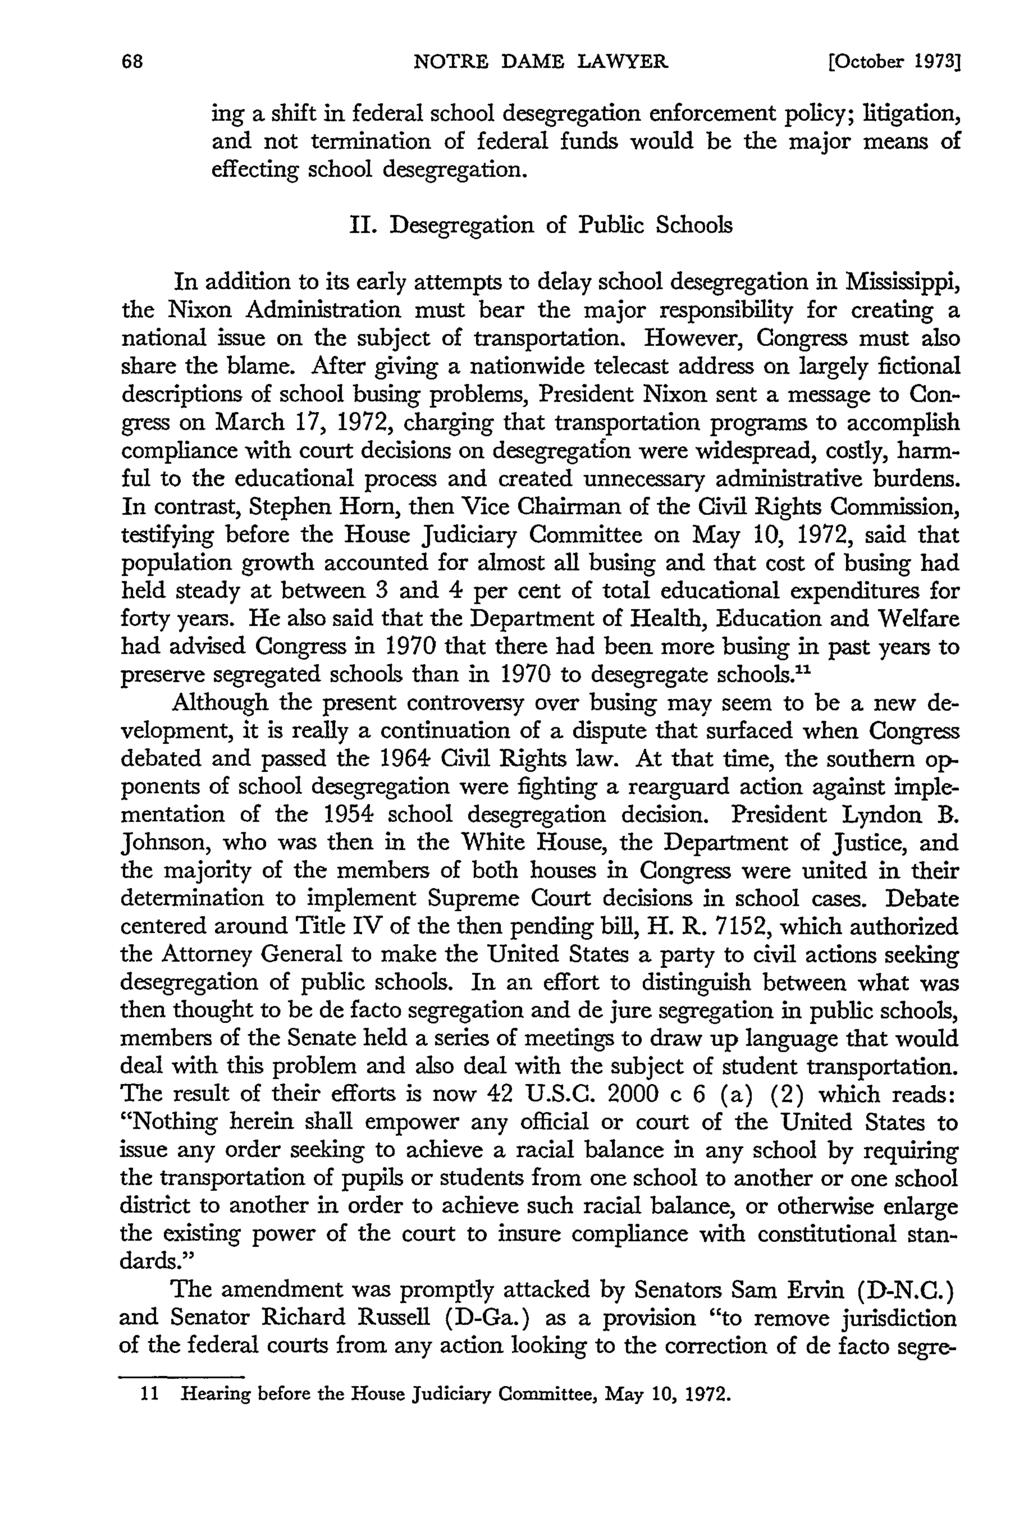 NOTRE DAME LAWYER [October 1973] ing a shift in federal school desegregation enforcement policy; litigation, and not termination of federal funds would be the major means of effecting school